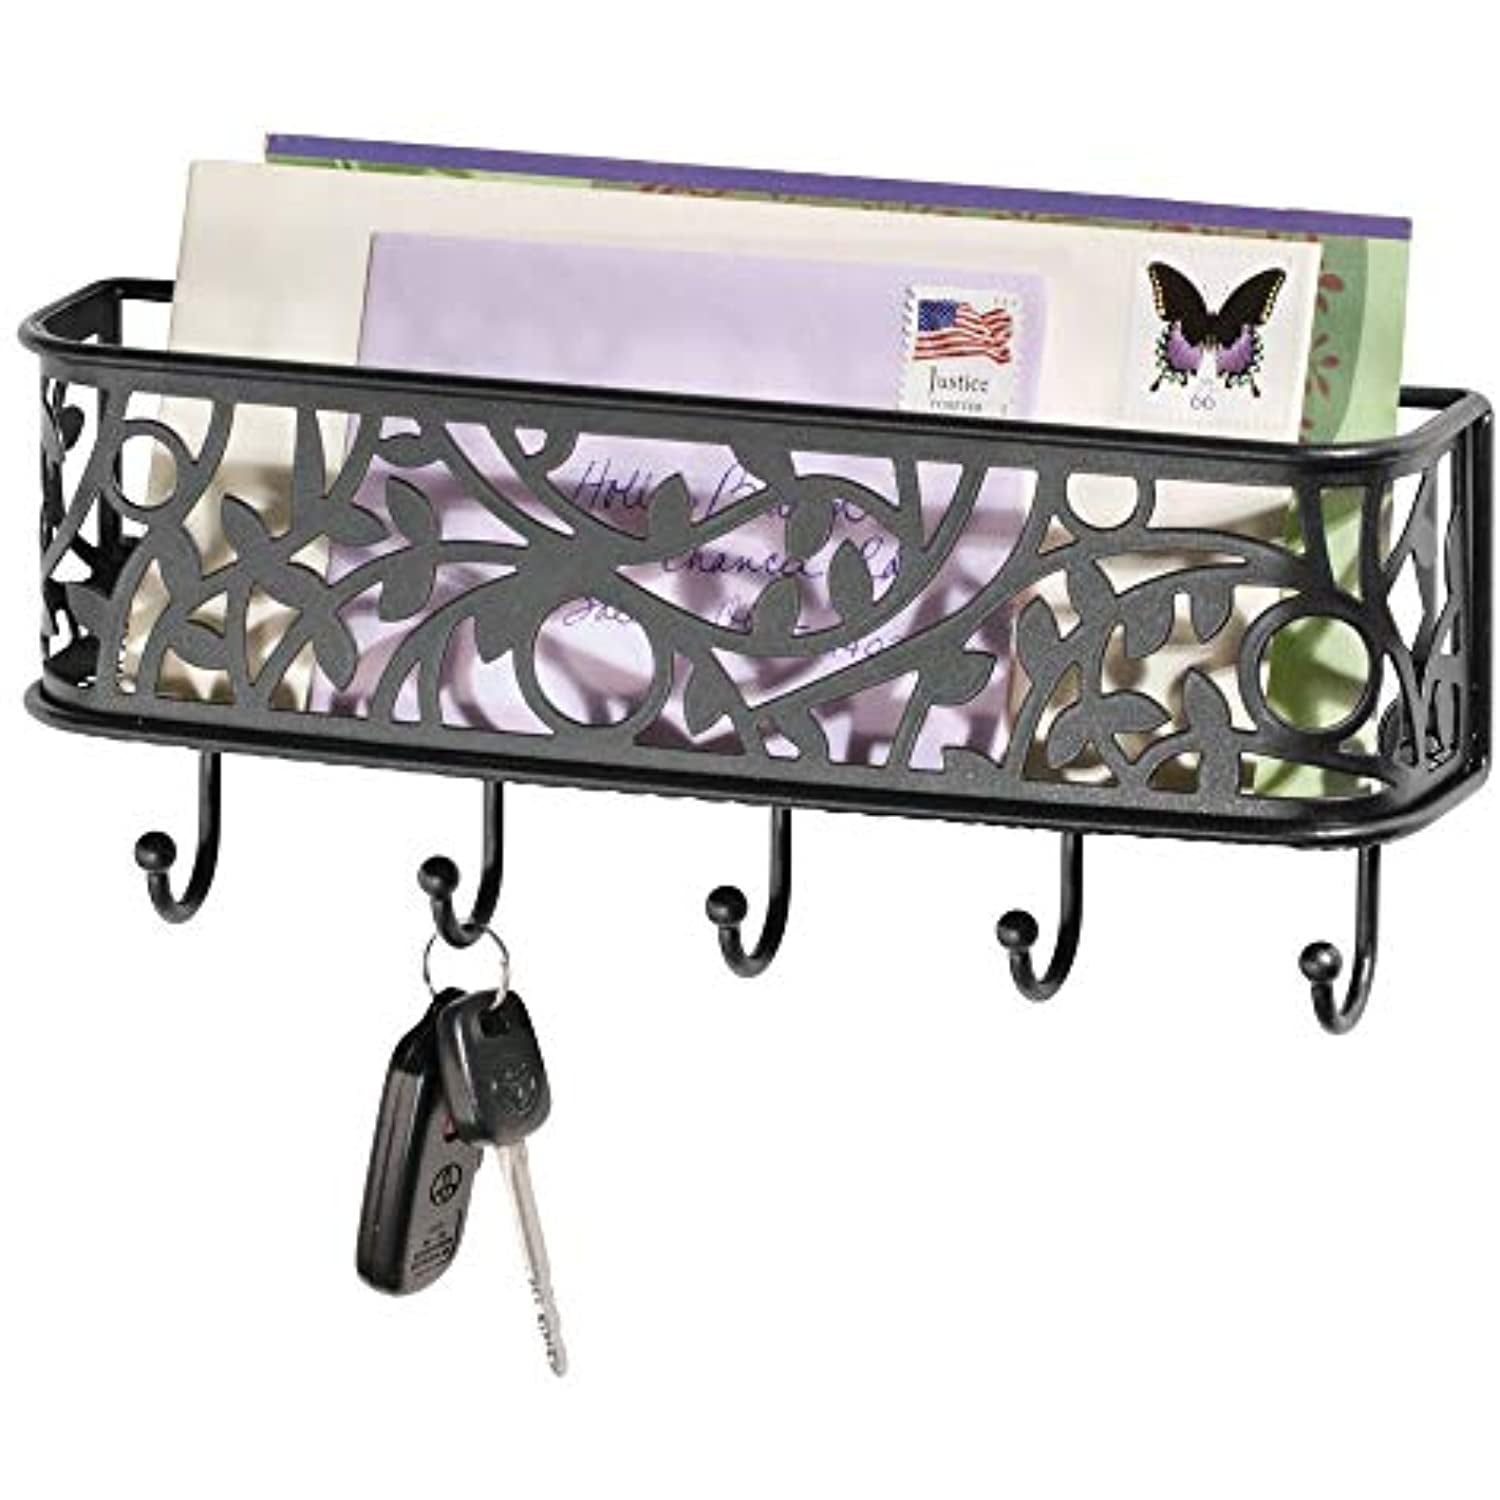 Unishopping Metal Wall Mount Mail Letter Holder Key Rack Hook Organizer 11.81 x 4.92 x 7.68 inches 1 pc